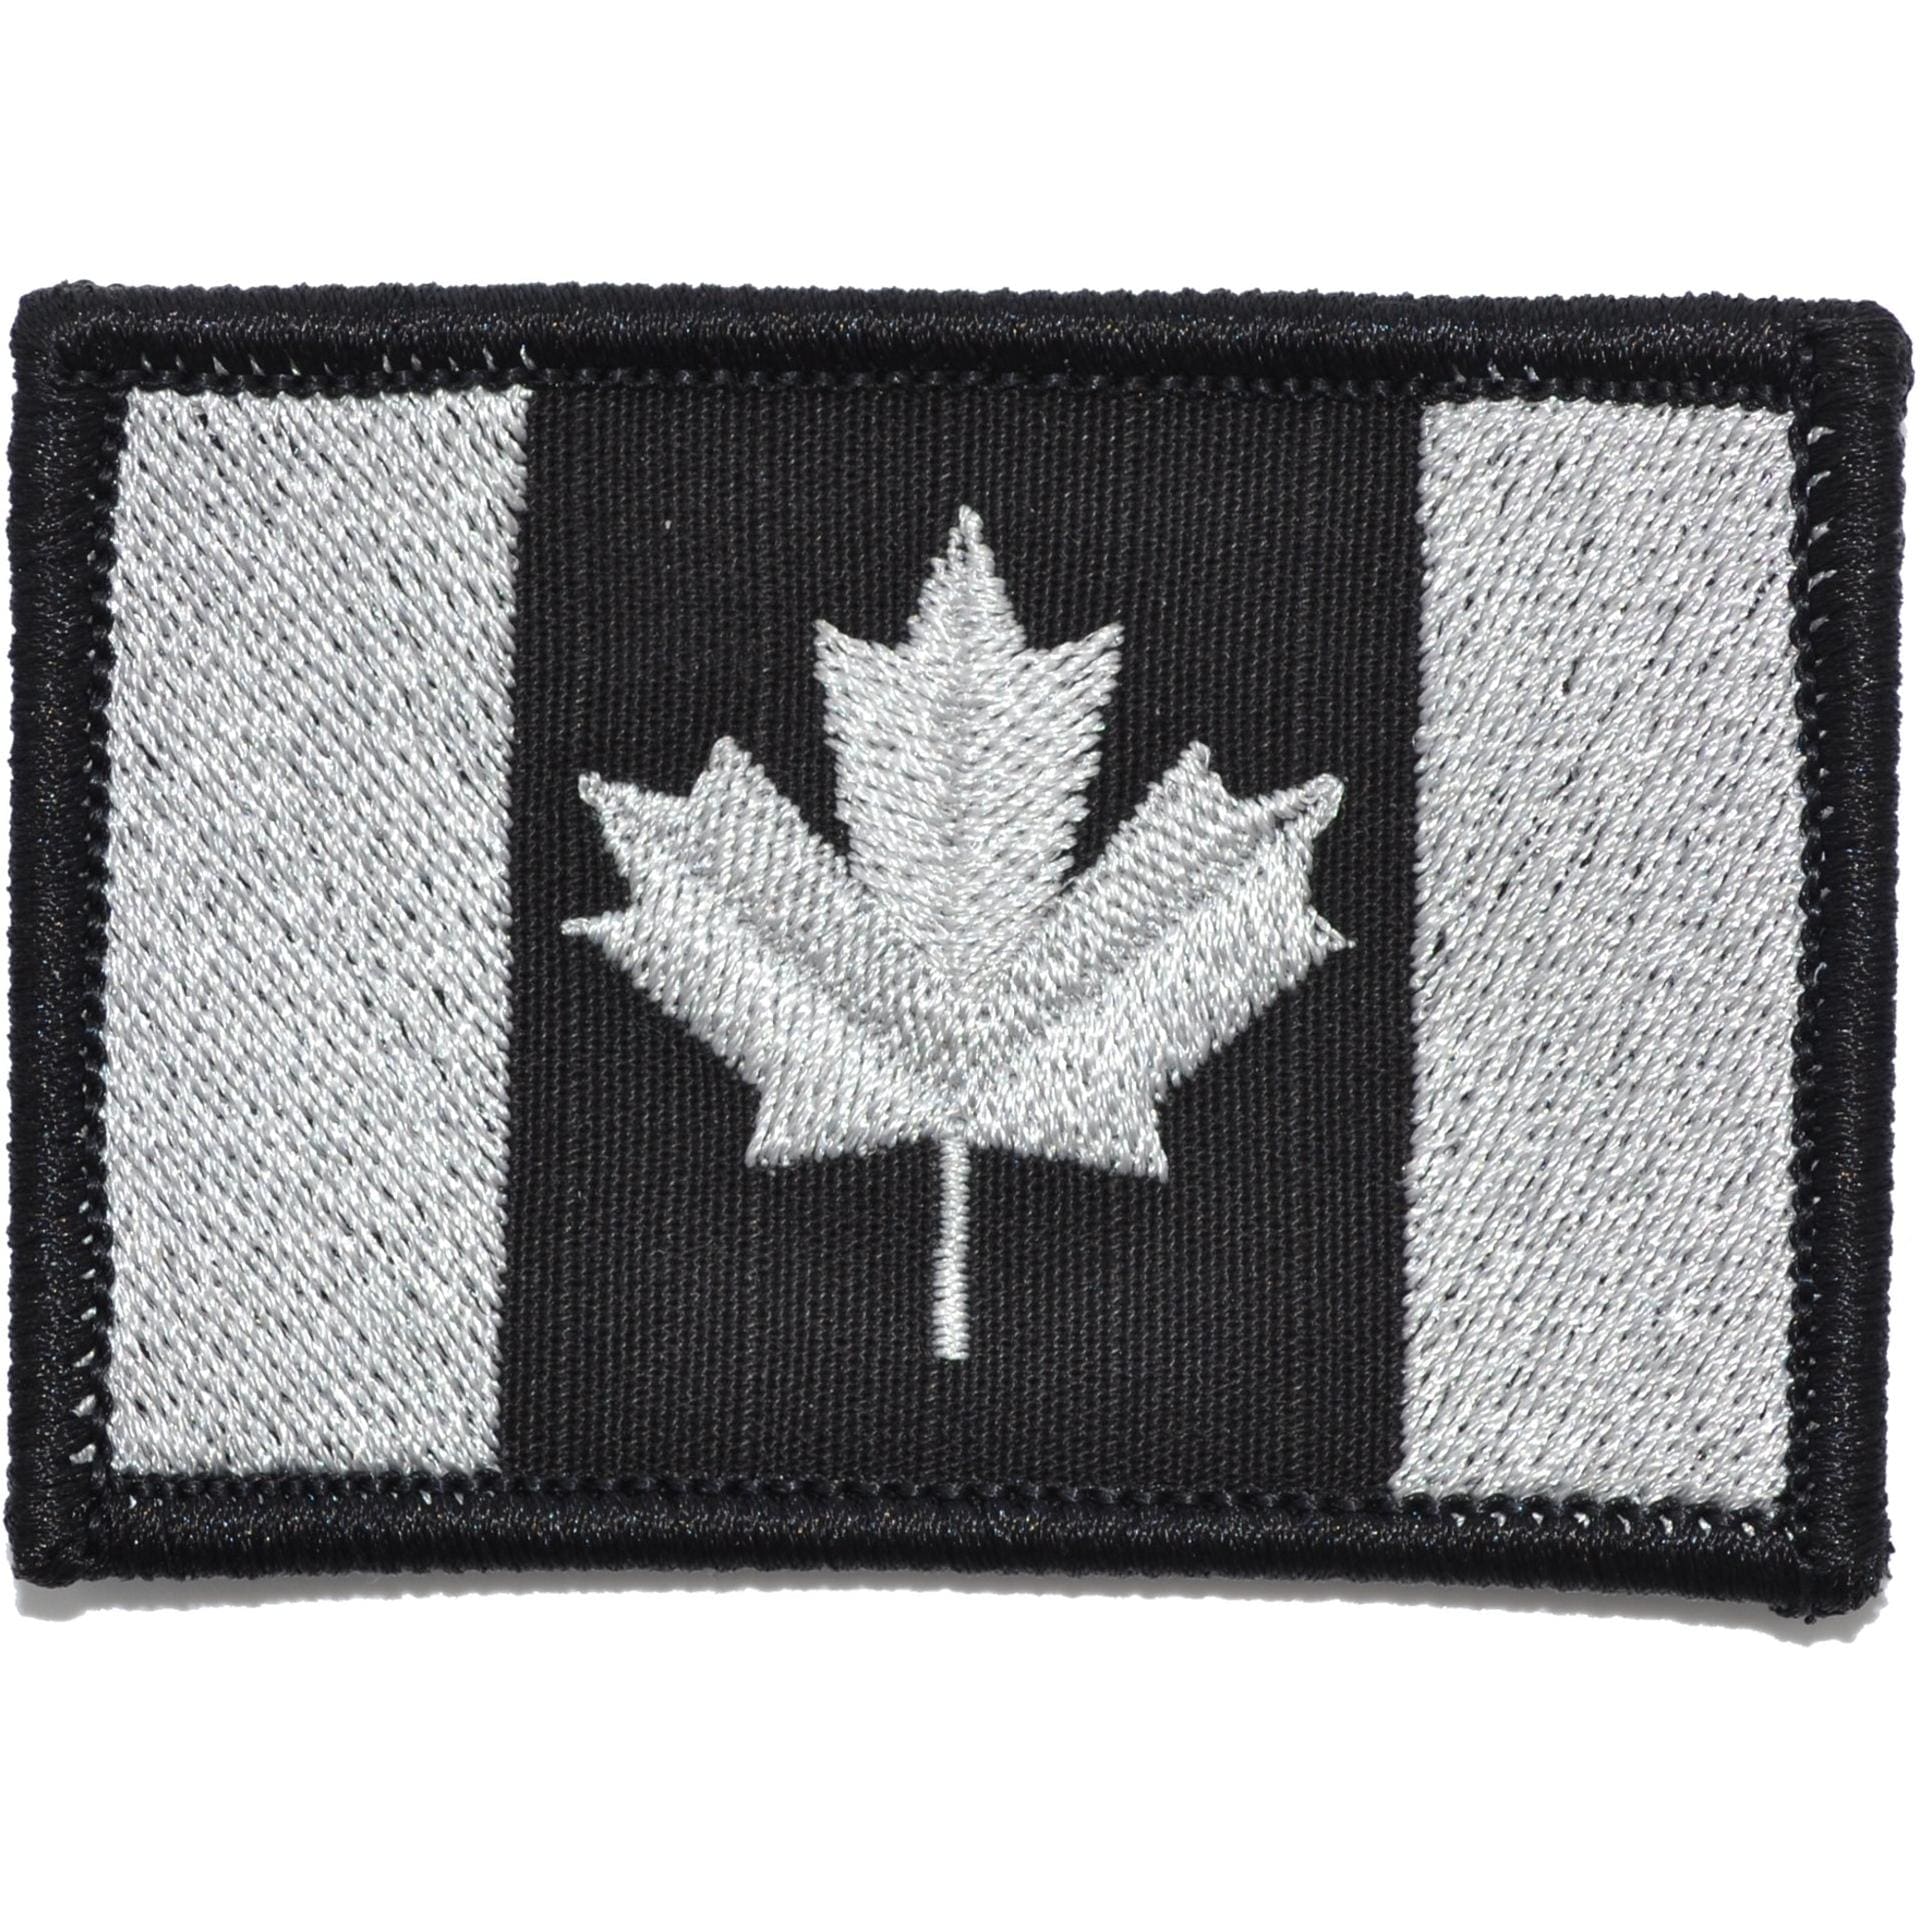 Tactical Gear Junkie Patches Black Canada Flag - 2x3 Patch